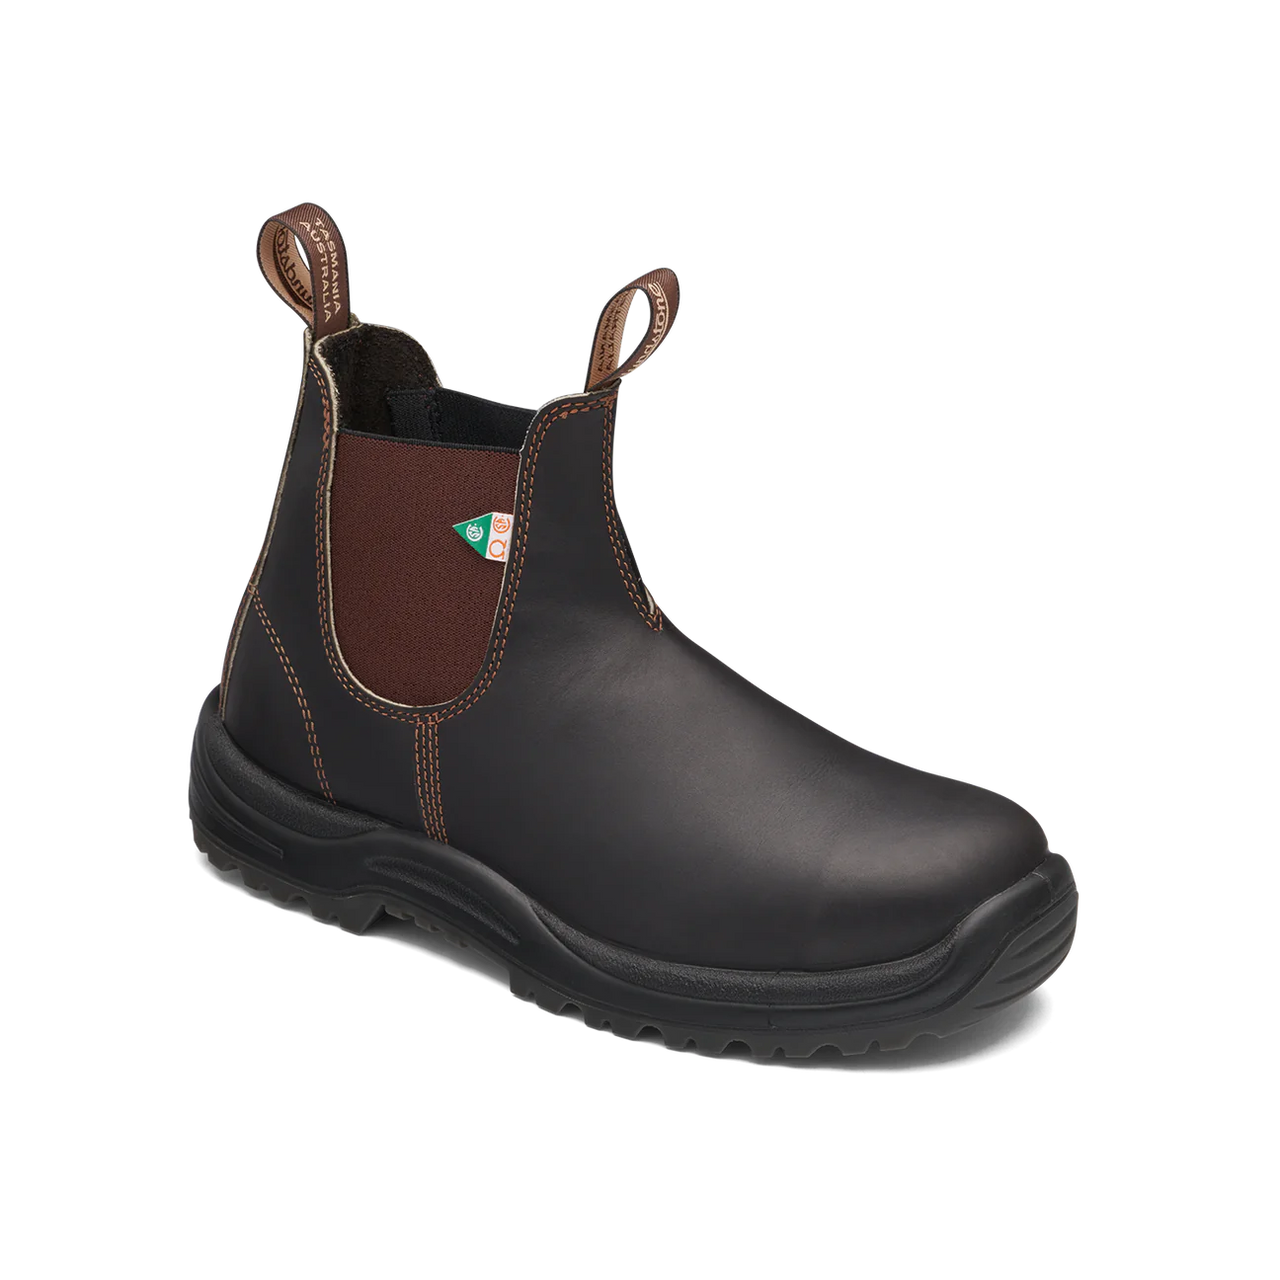 Blundstone Work & Safety #162 Boot - Stout Brown